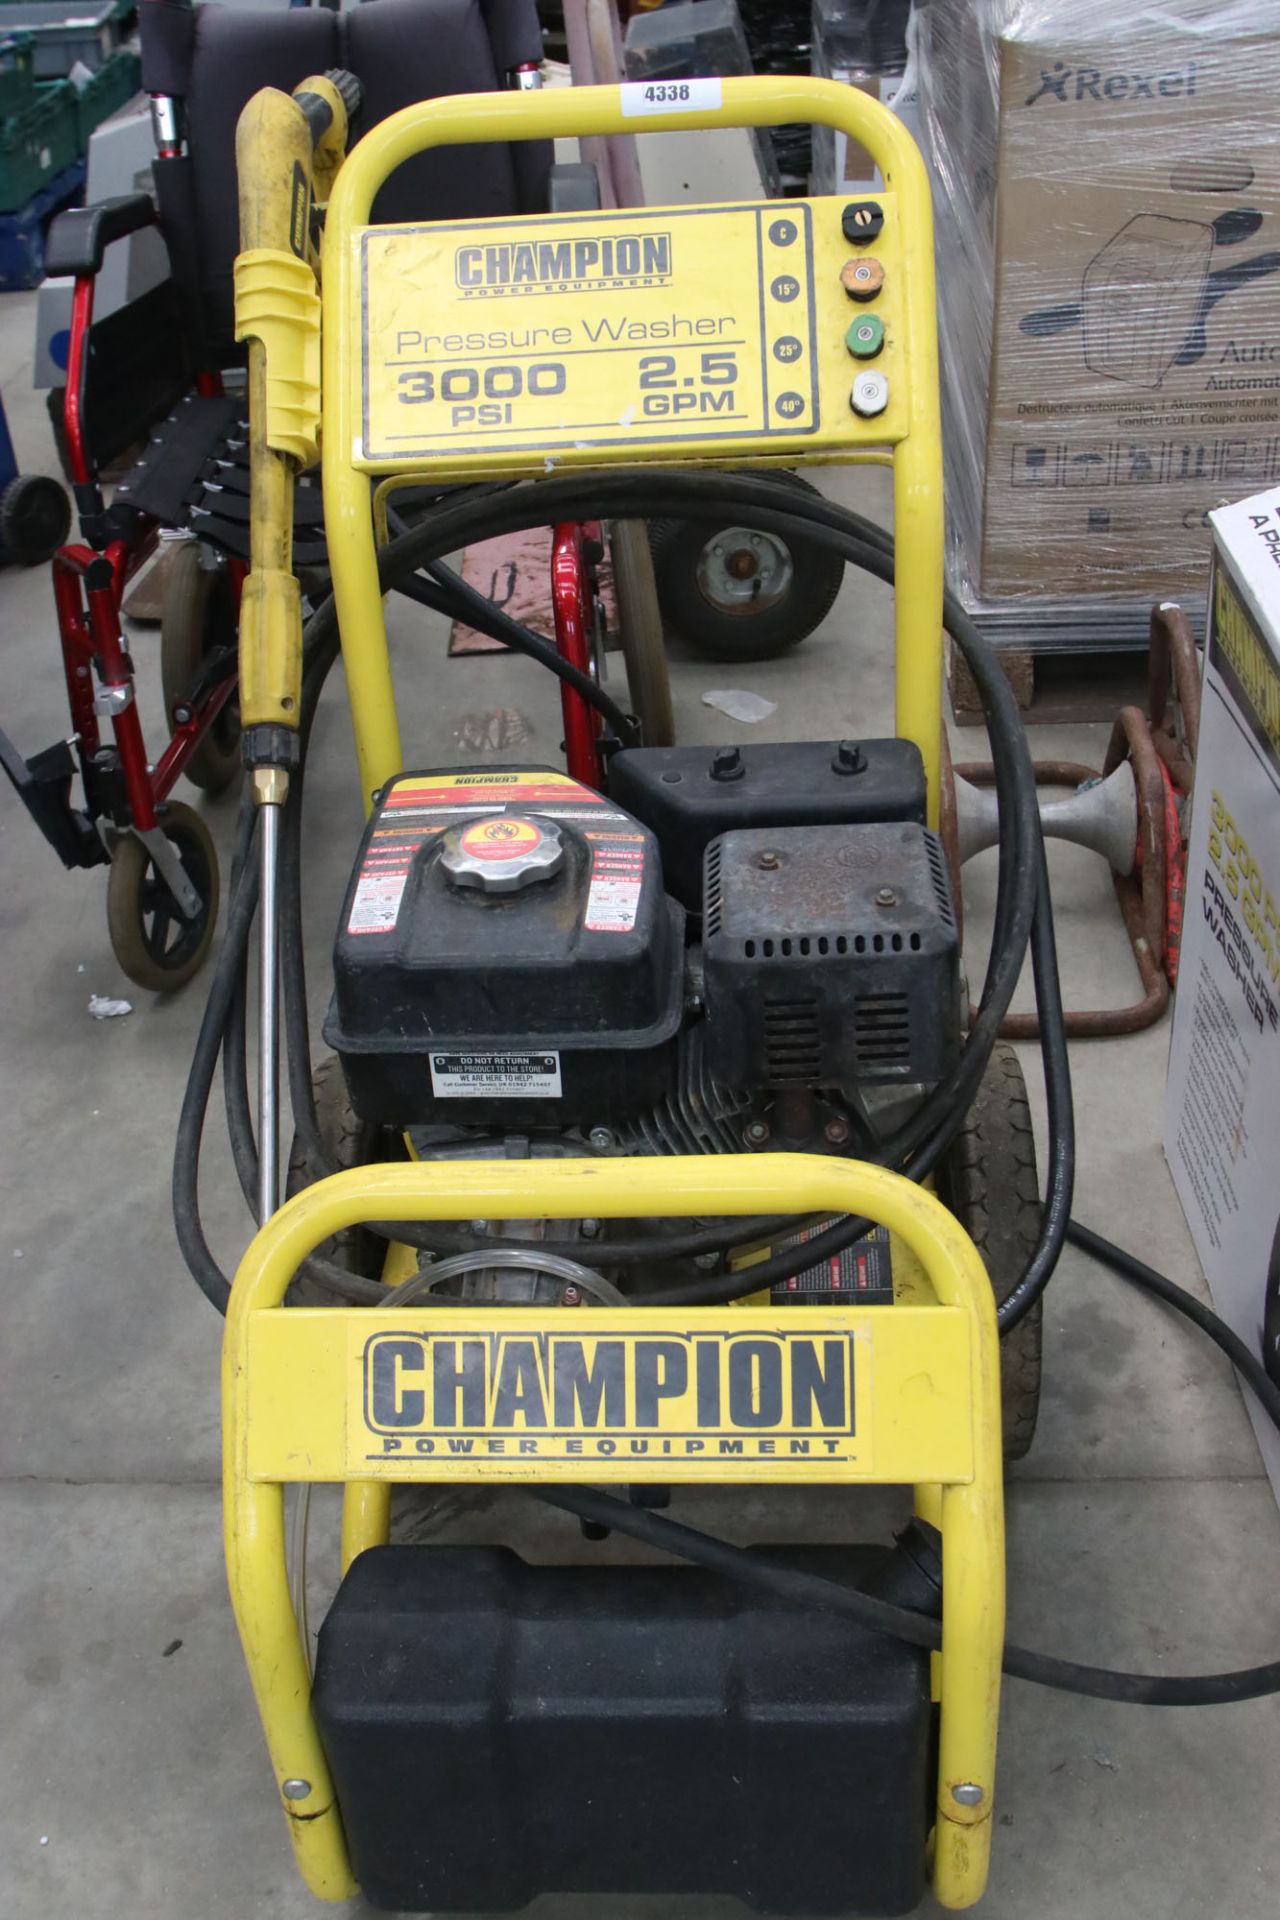 Unboxed Champion petrol powered pressure washer